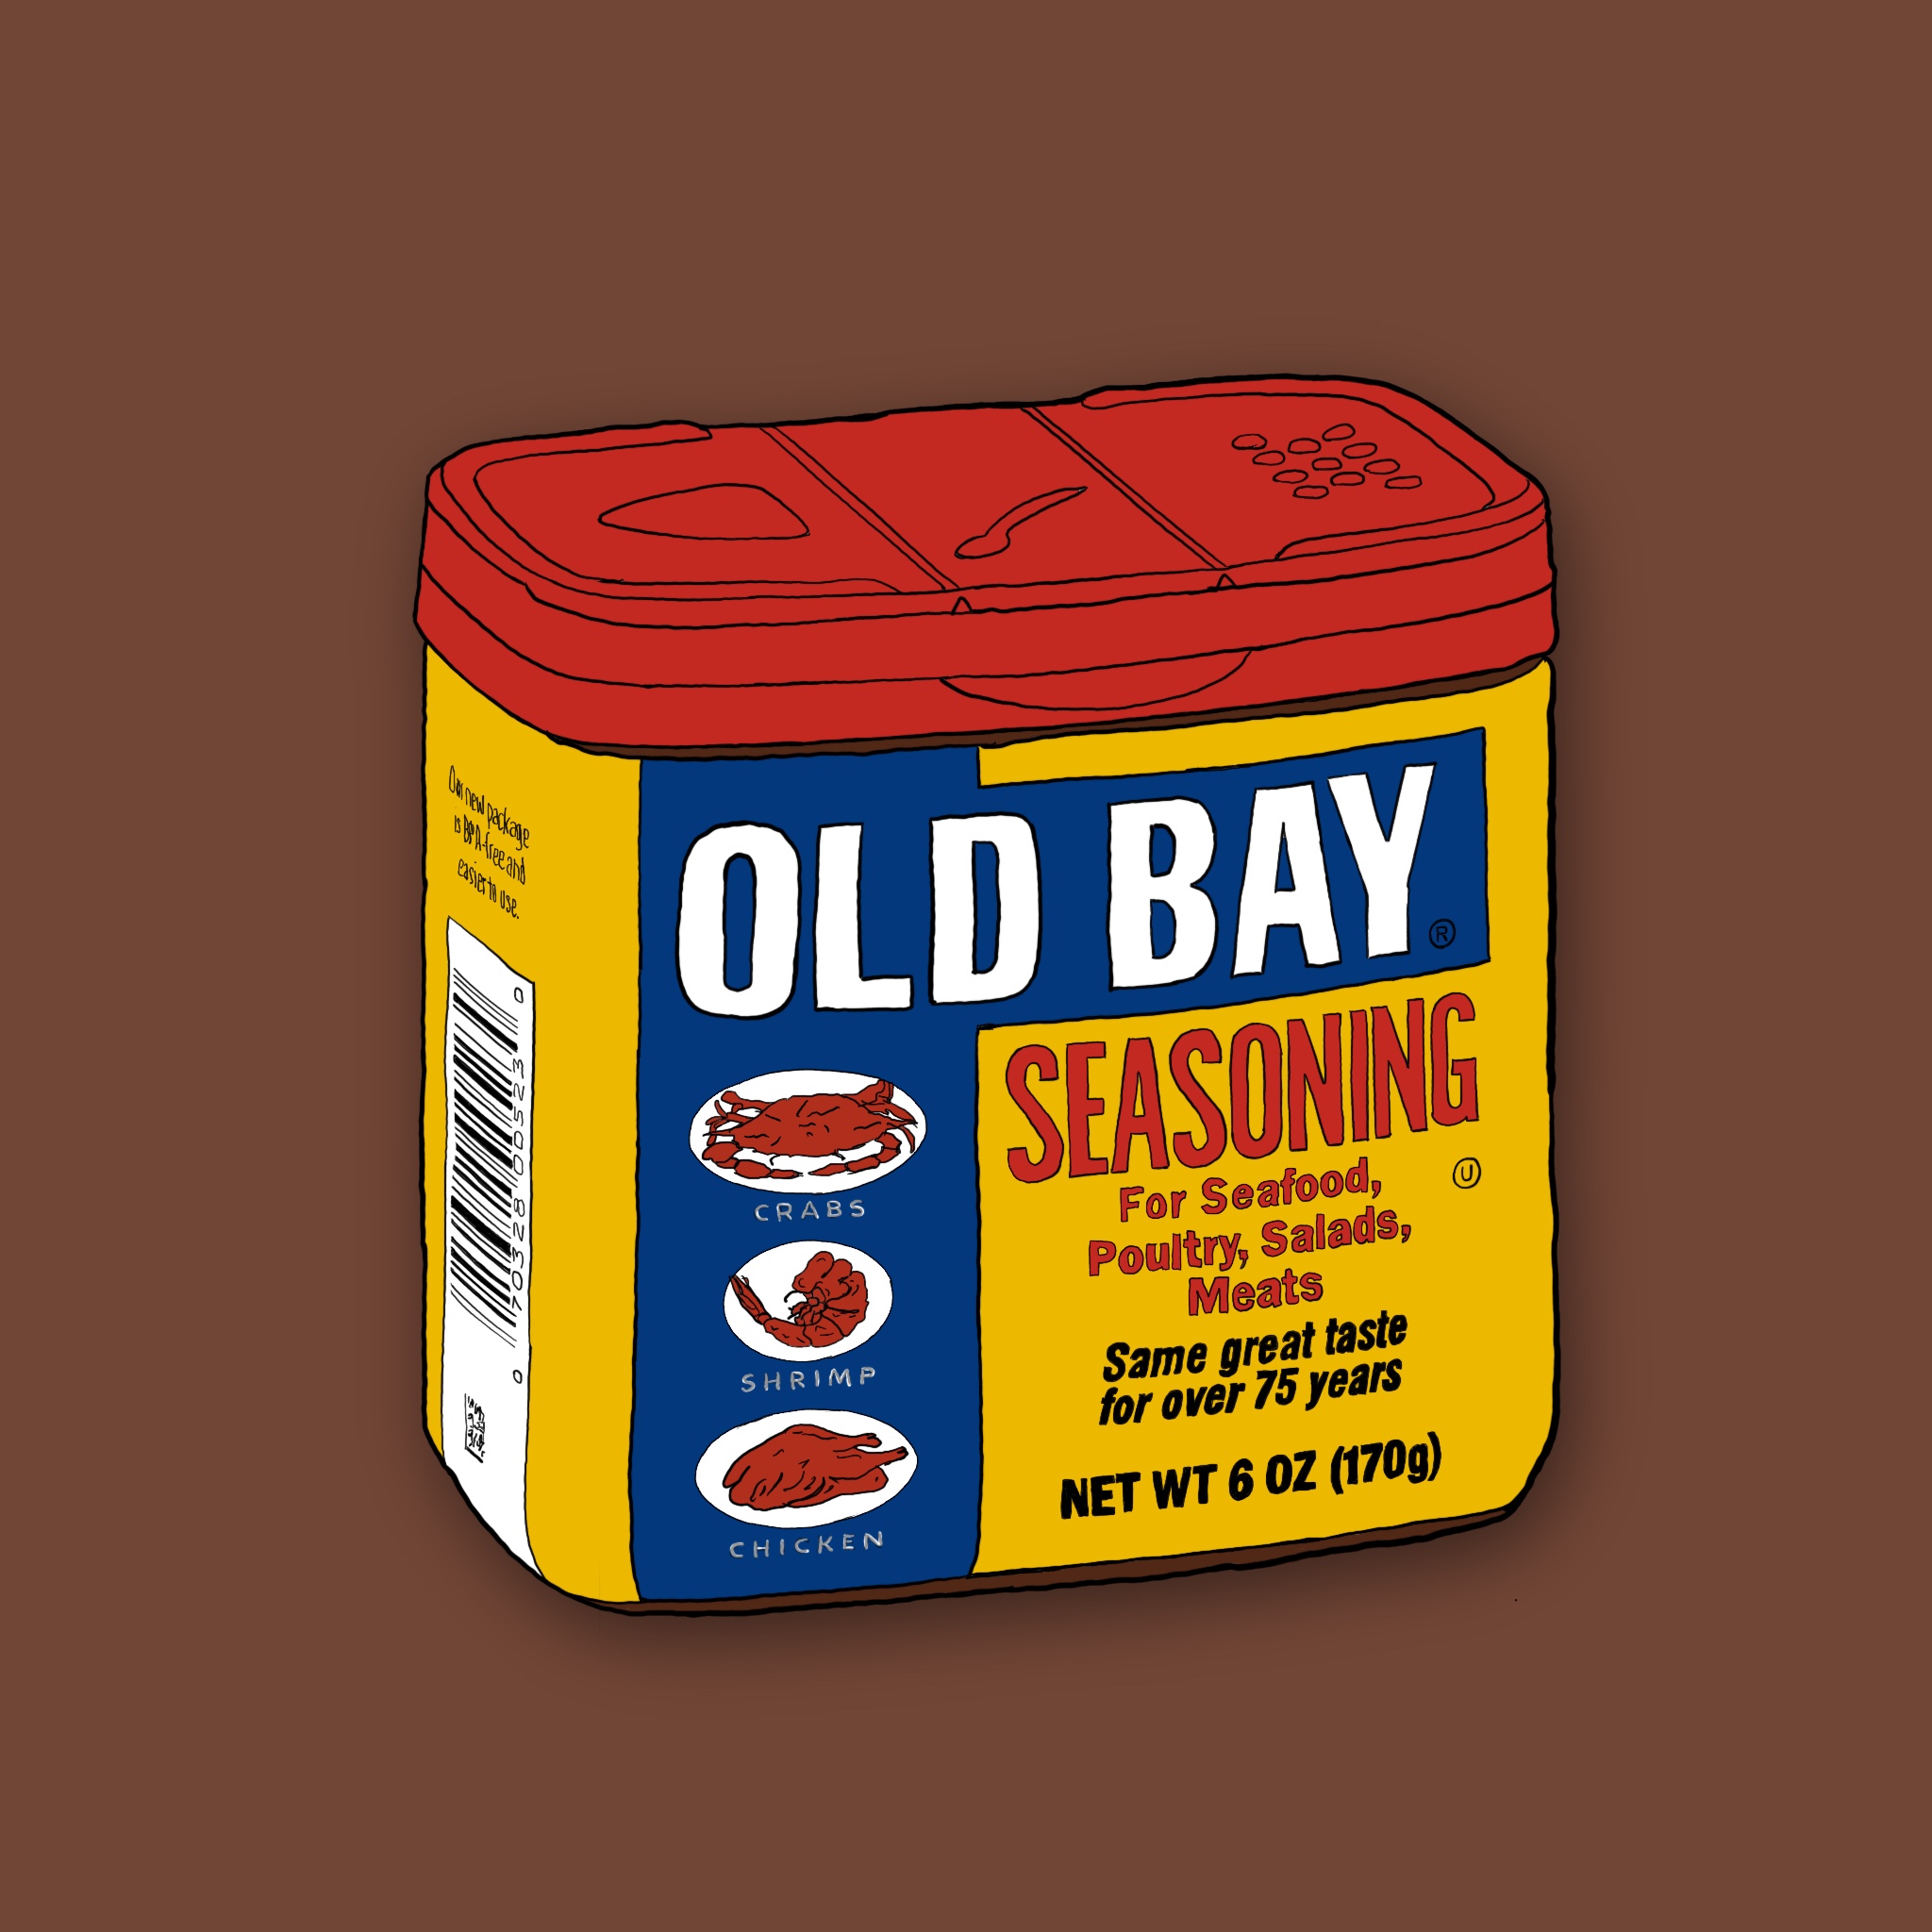 A sketch done in Procreate of an Old Bay container.